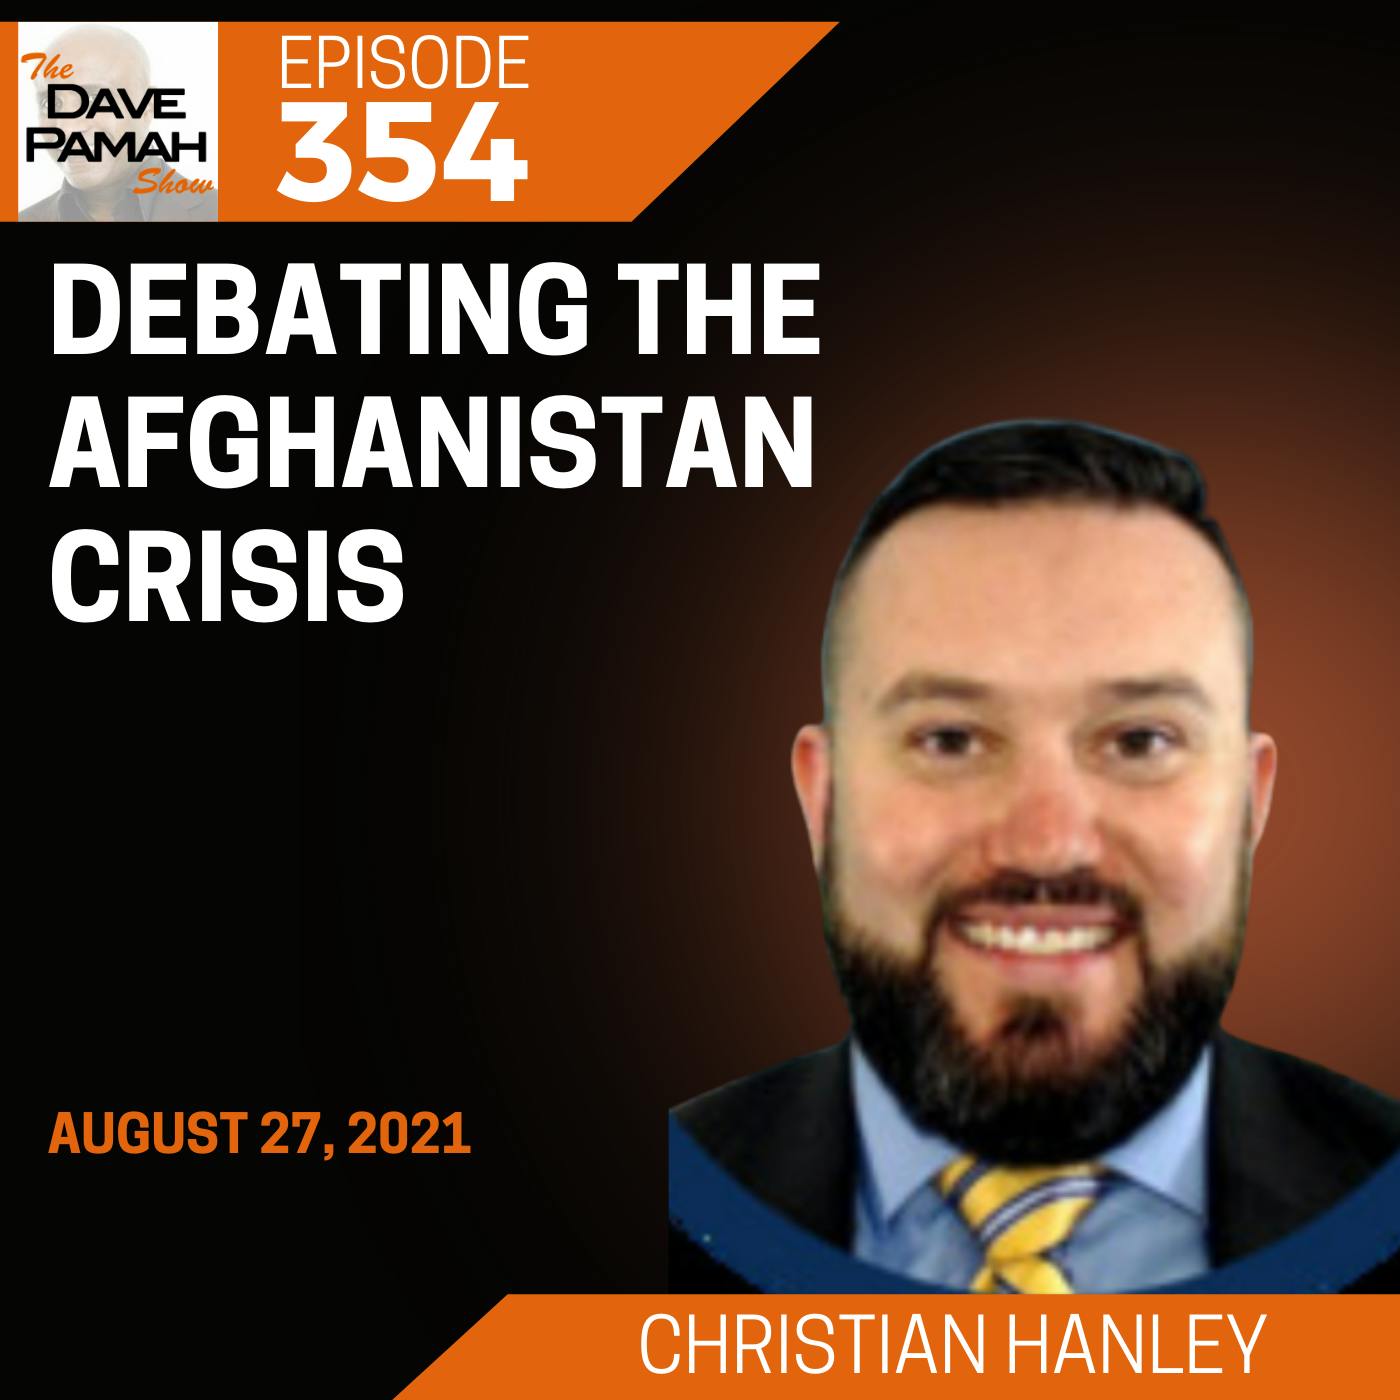 Debating the Afghanistan crisis with Christian Hanley